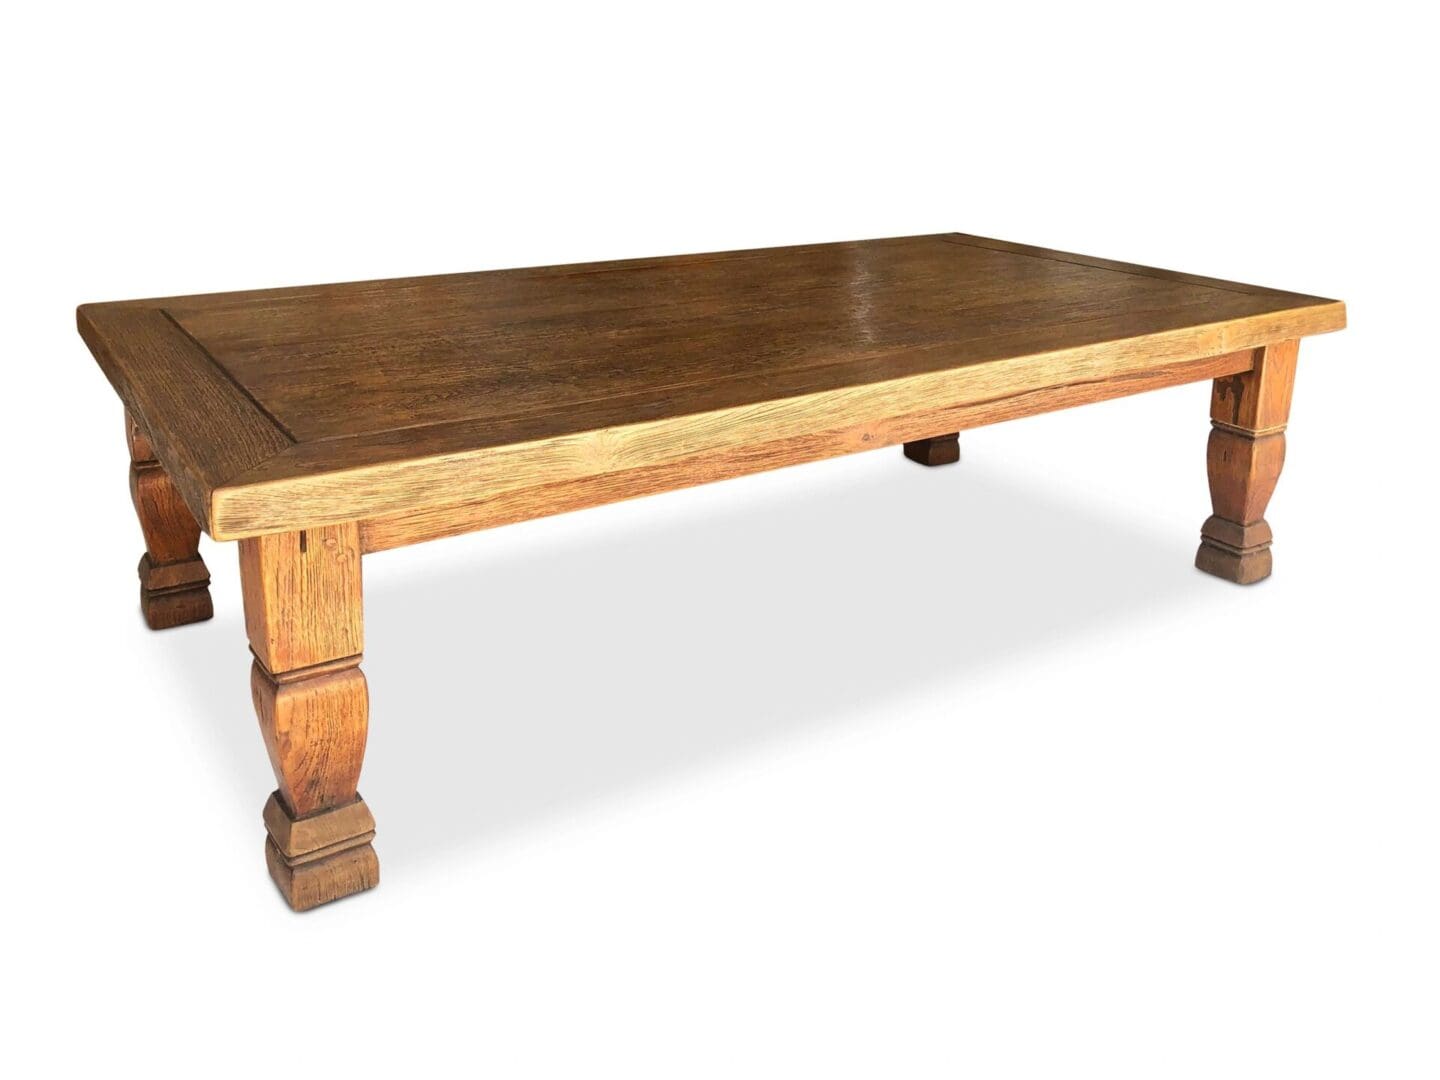 A wooden table with a brown top and two legs.